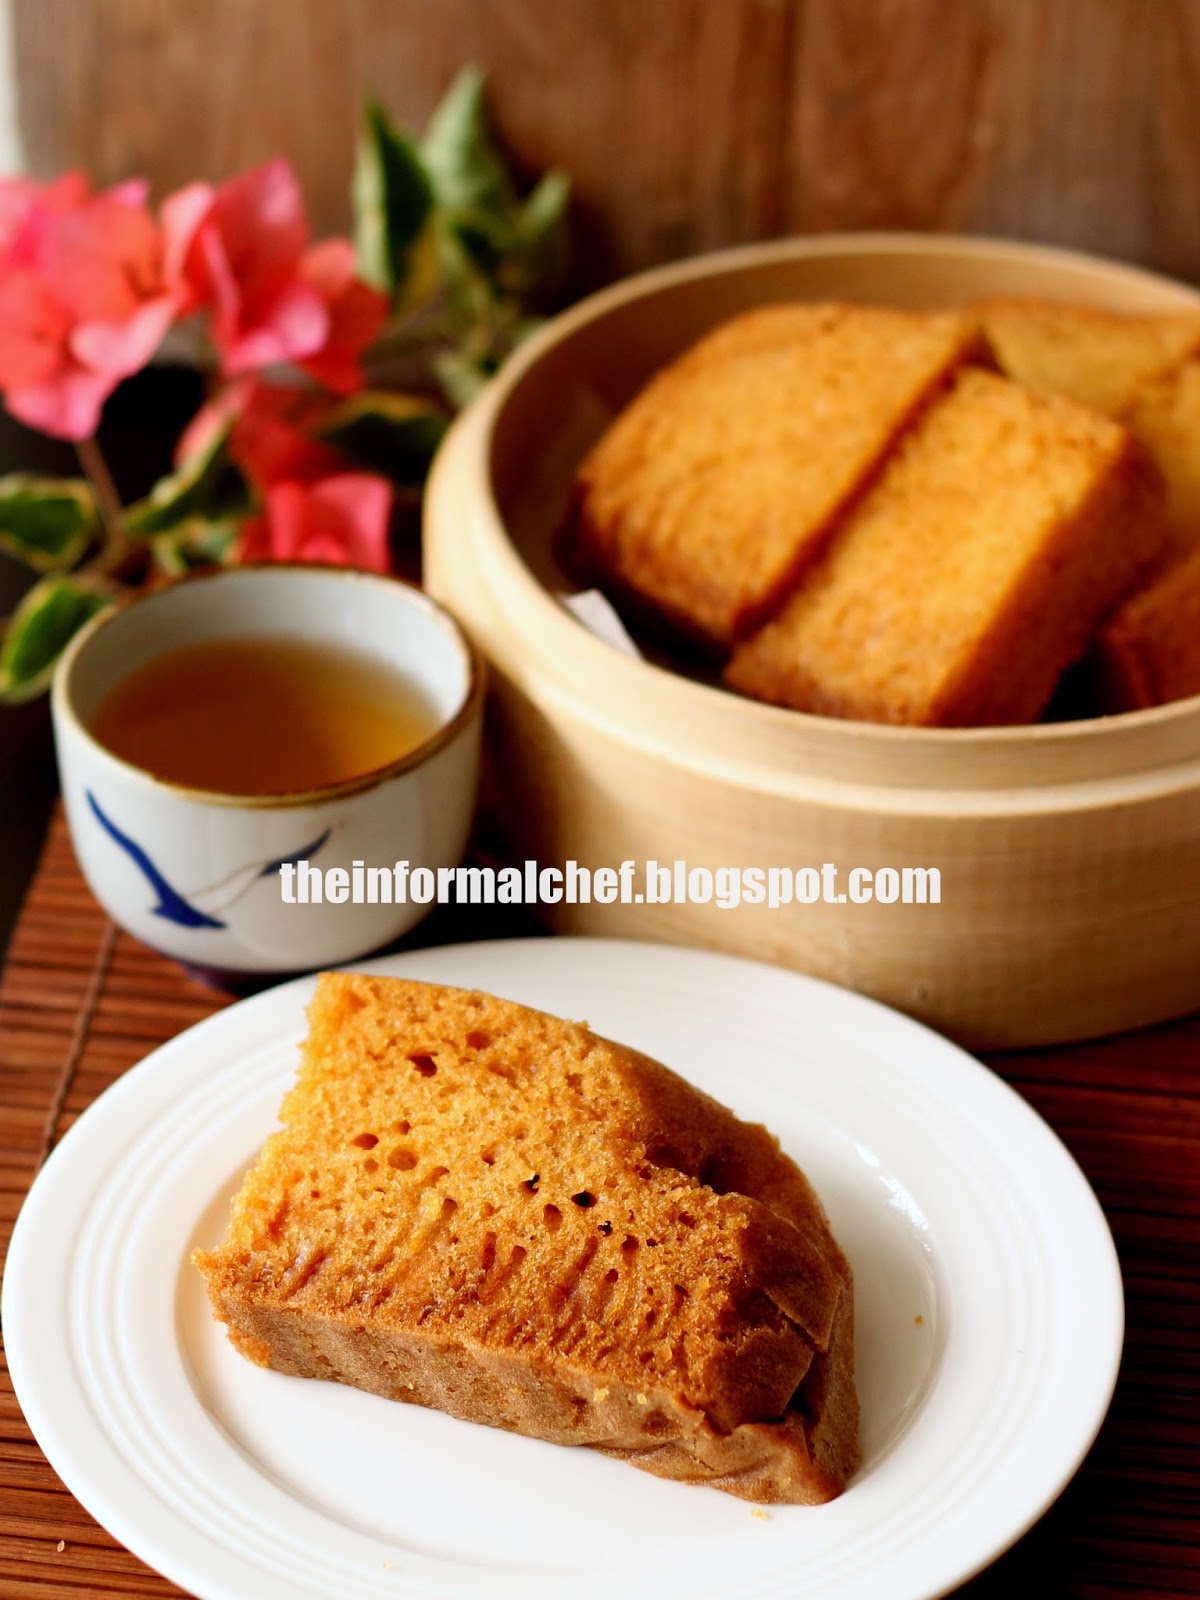 The Informal Chef: Chinese Steamed Cake/Ma Lai Go 马来糕